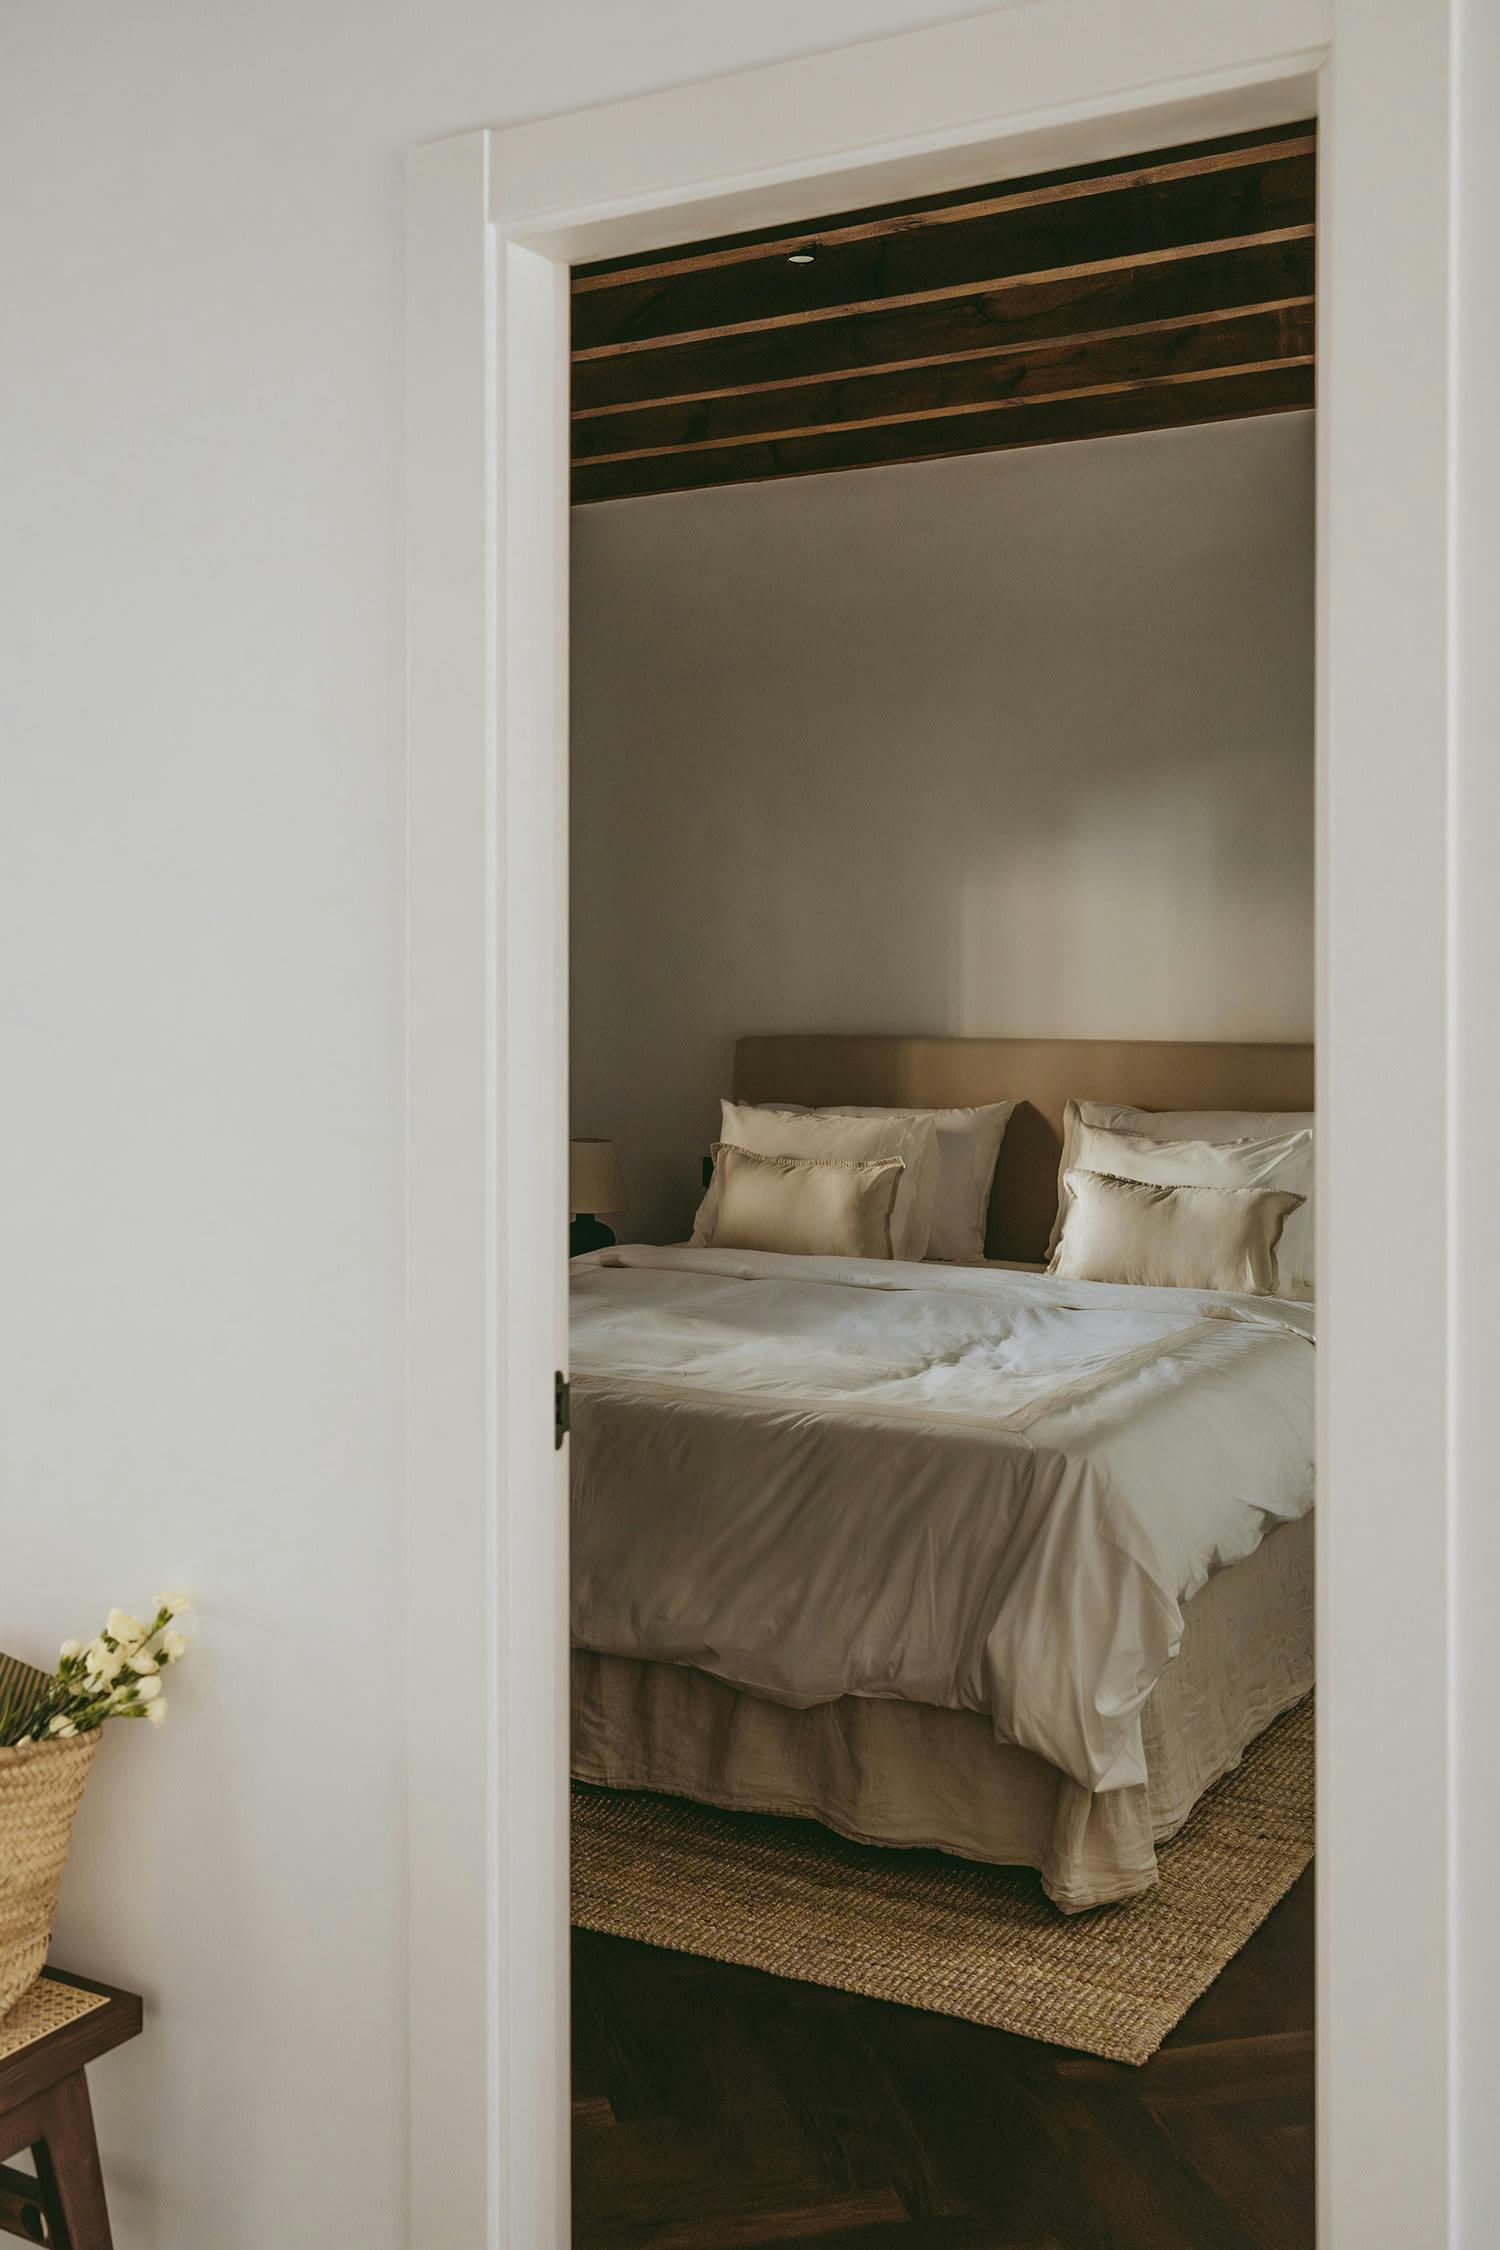 The image features a bedroom with a large bed in the center, surrounded by a white wall and a doorway. The bed is neatly made with a white comforter and pillows, and there is a potted plant nearby.